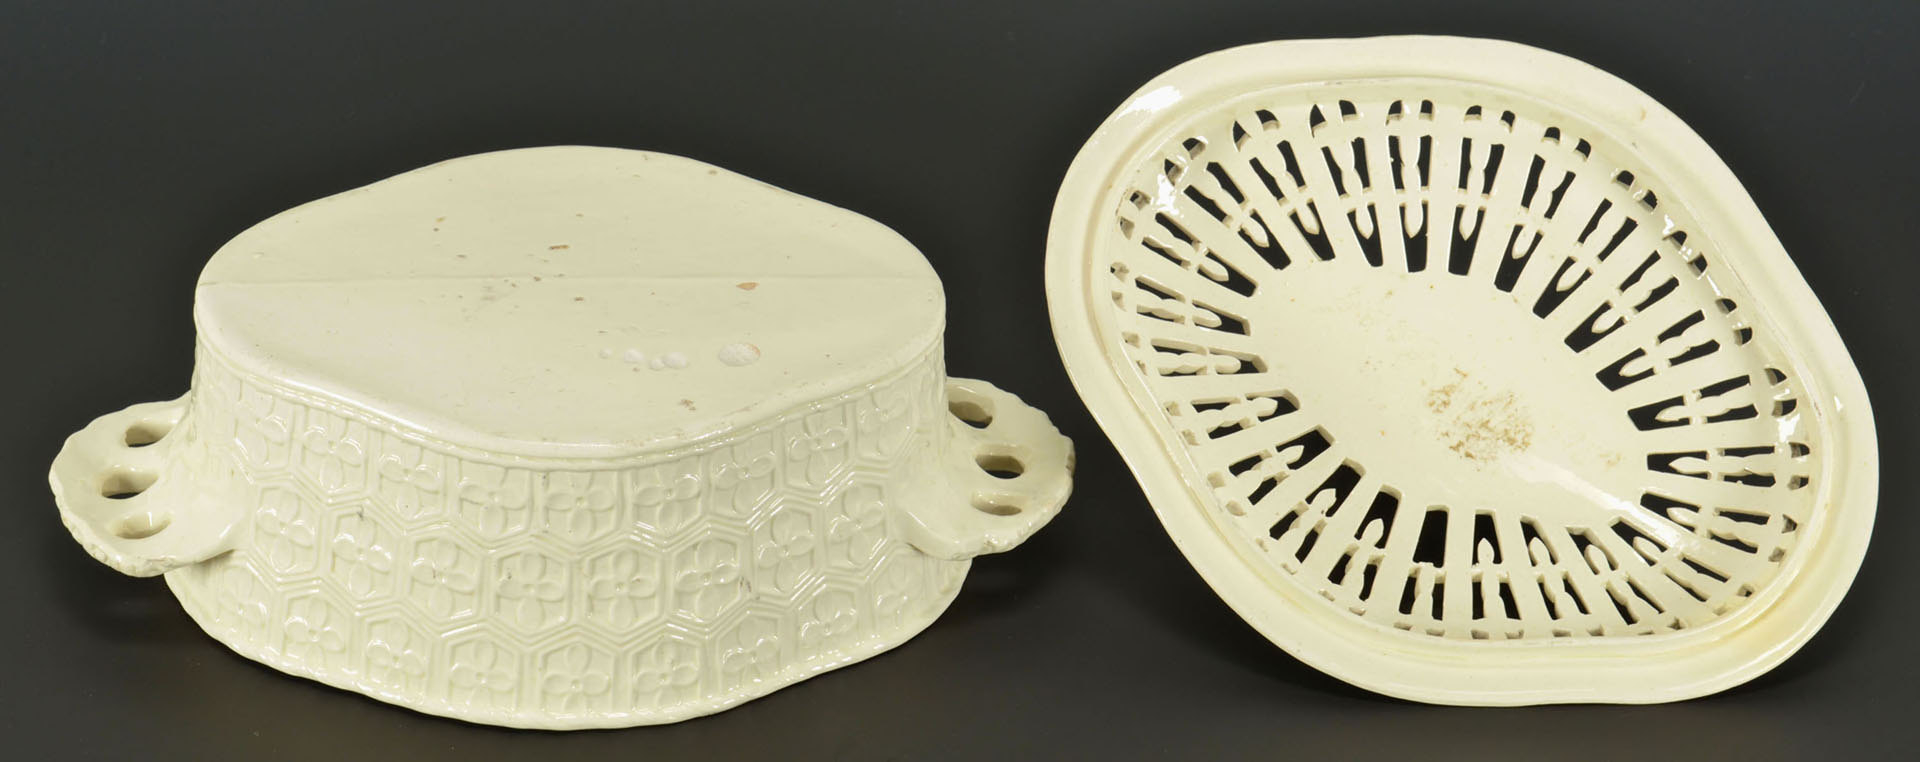 Lot 247: Creamware covered basket with figural knob